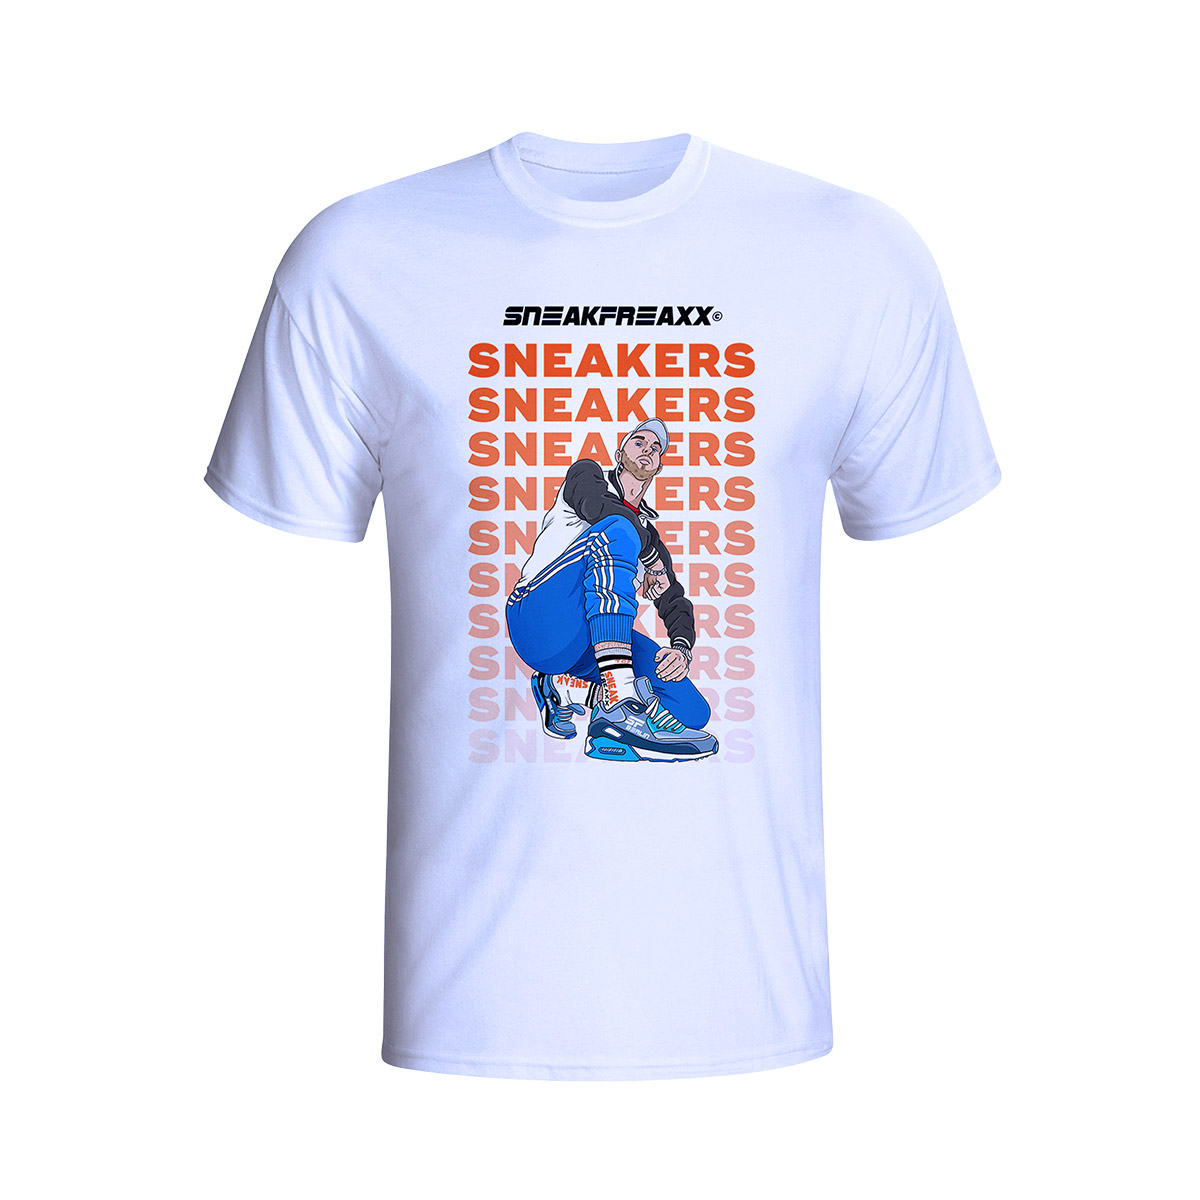 T-SHIRT - SNEAKERS I - WEISS